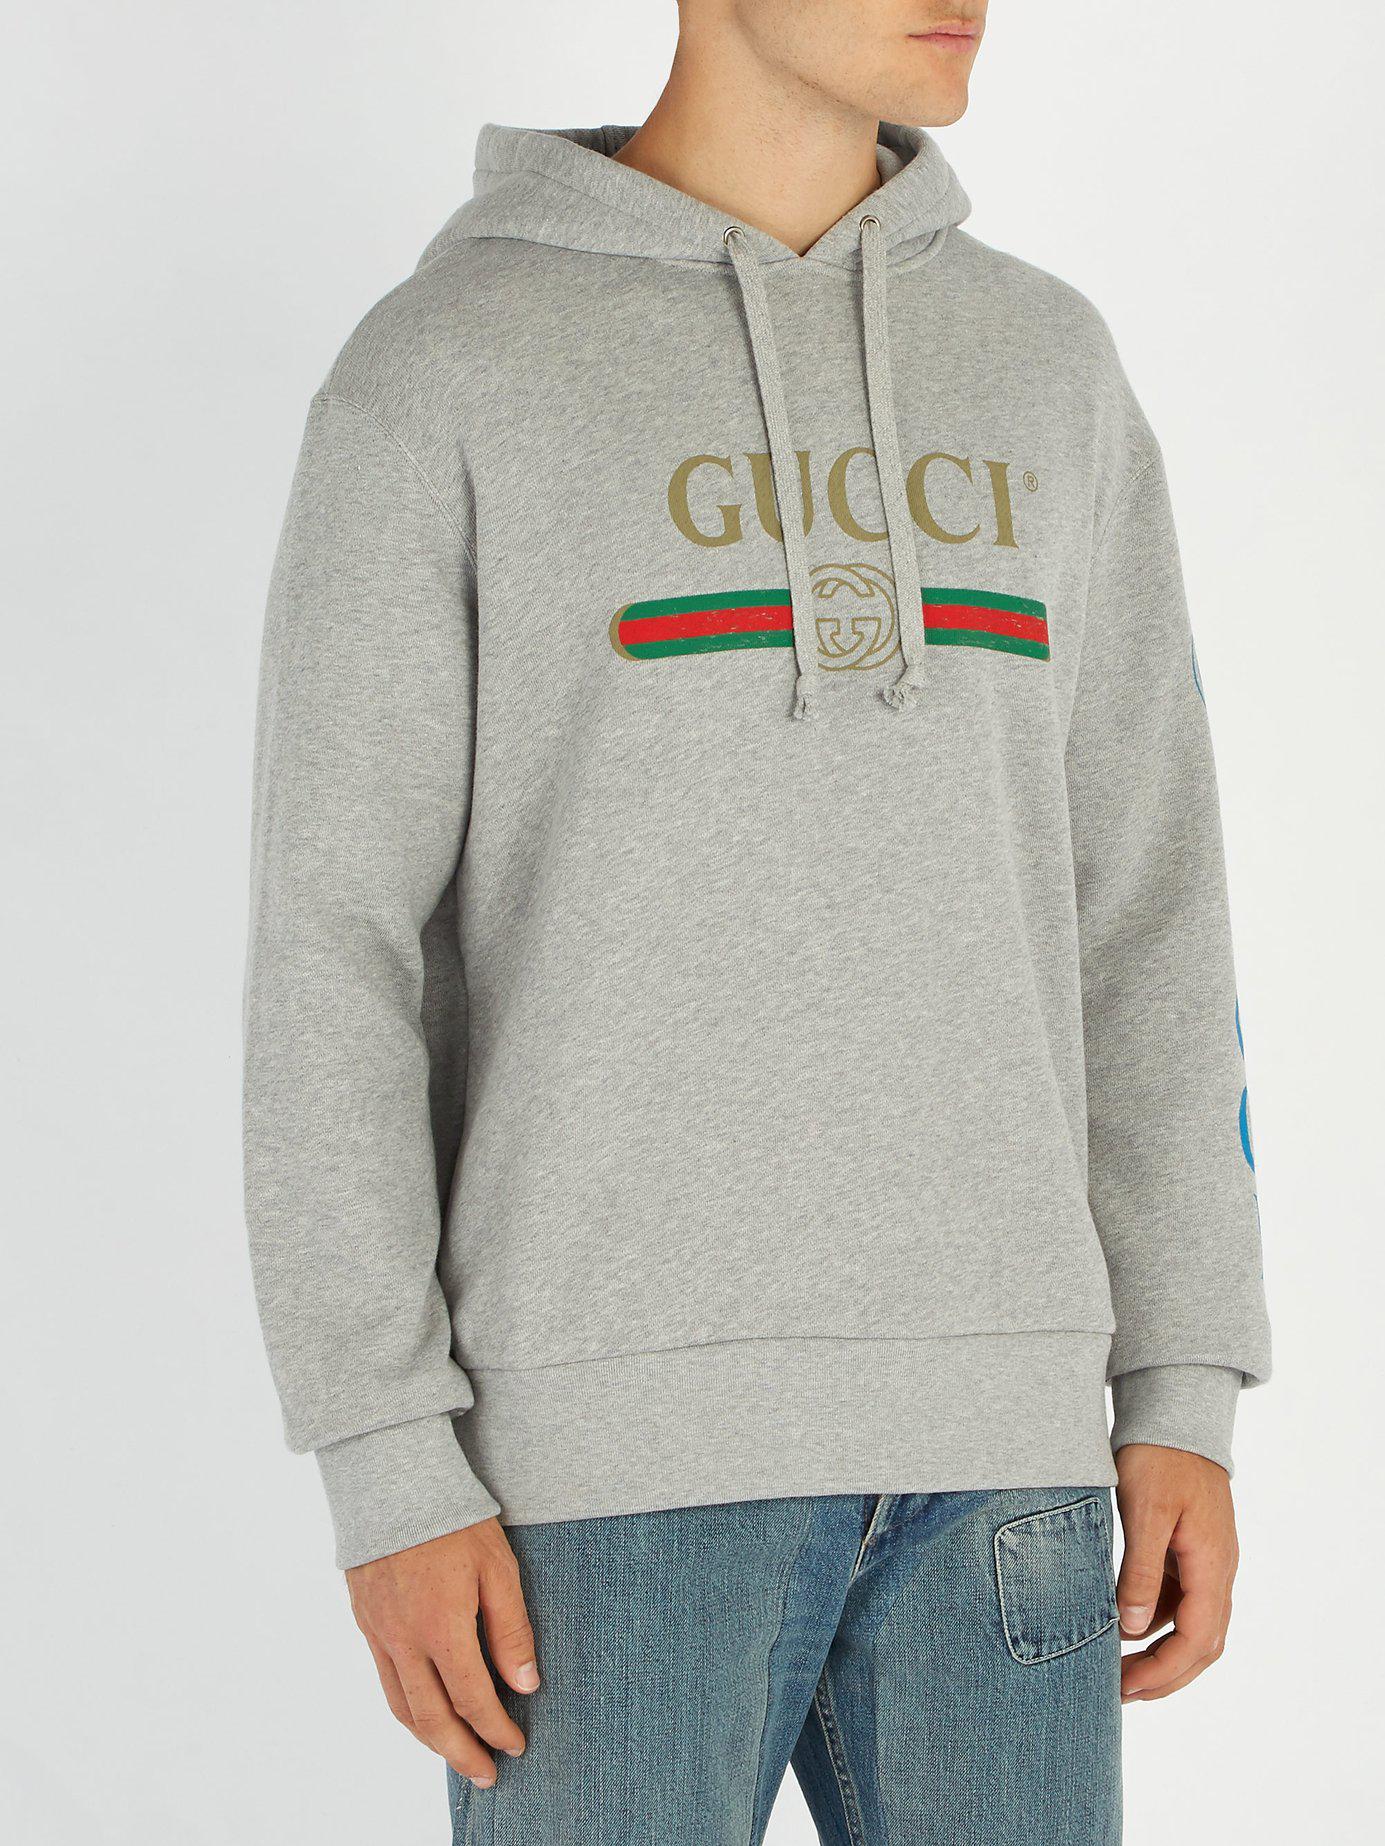 Gucci Cotton Dragon And Logo Hooded Sweatshirt in Grey (Gray) for Men - Lyst